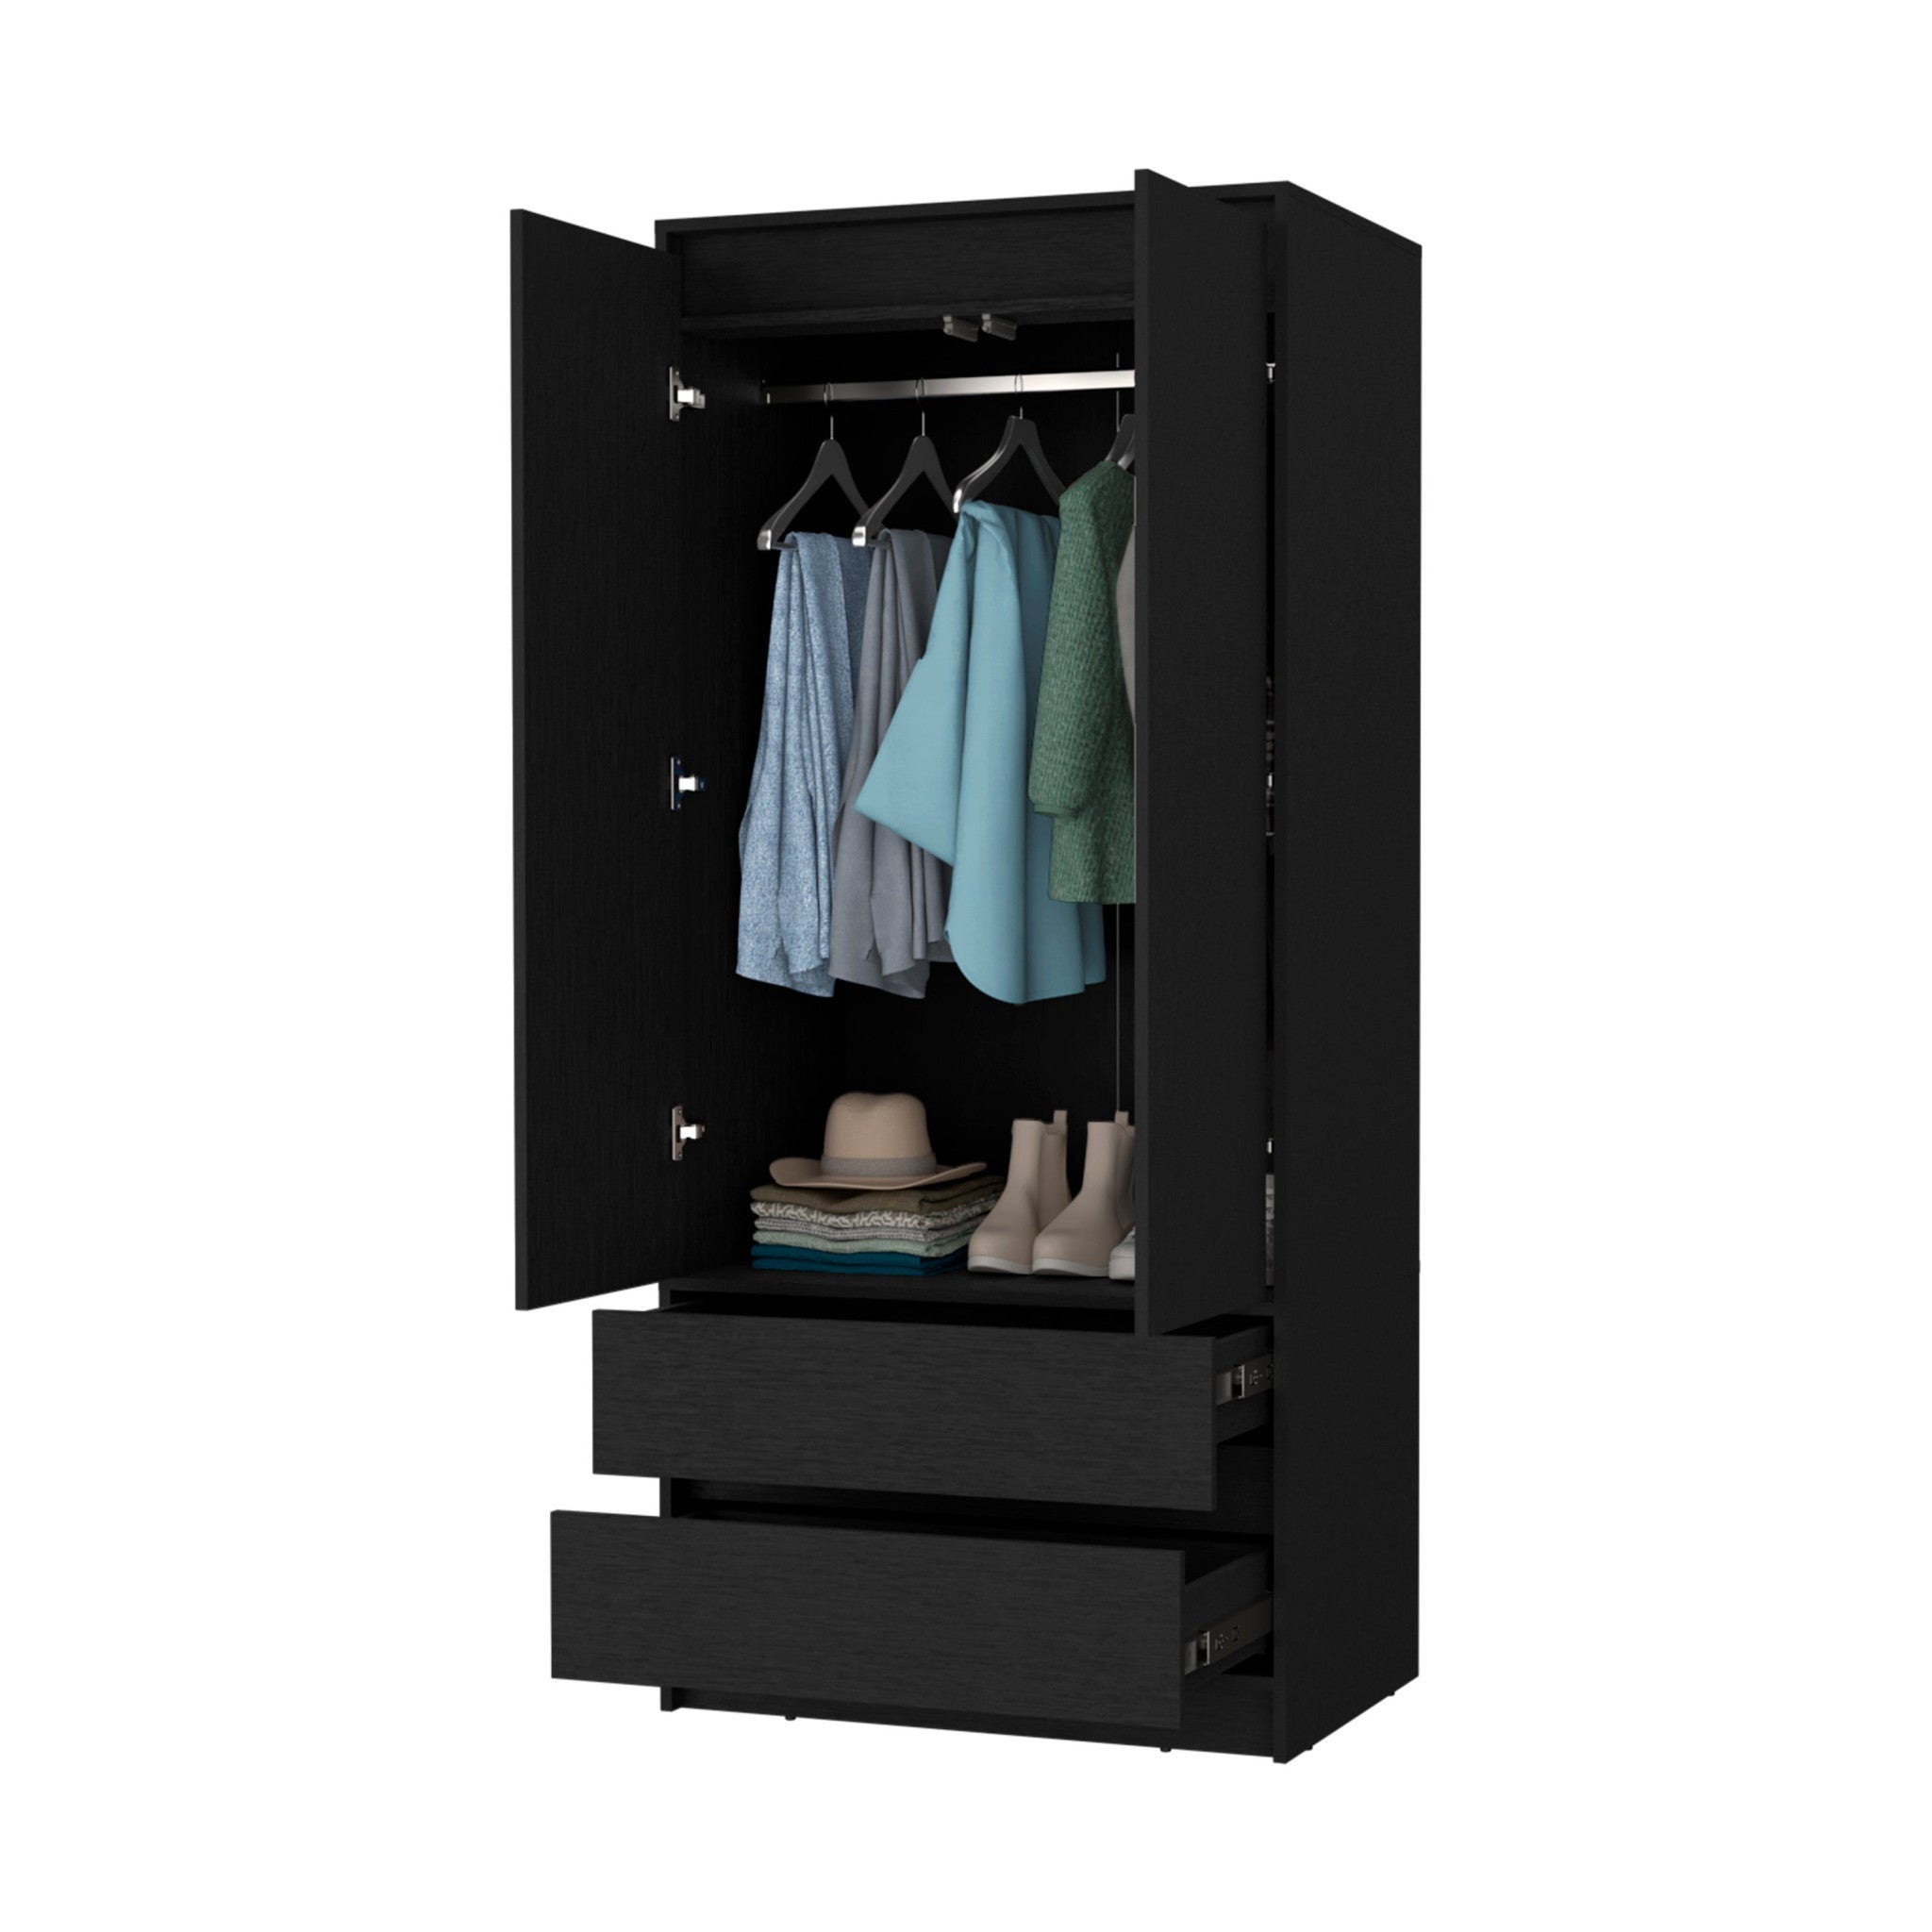 32" Black Accent Cabinet Soft Close With Multiple Shelves And Three Drawers